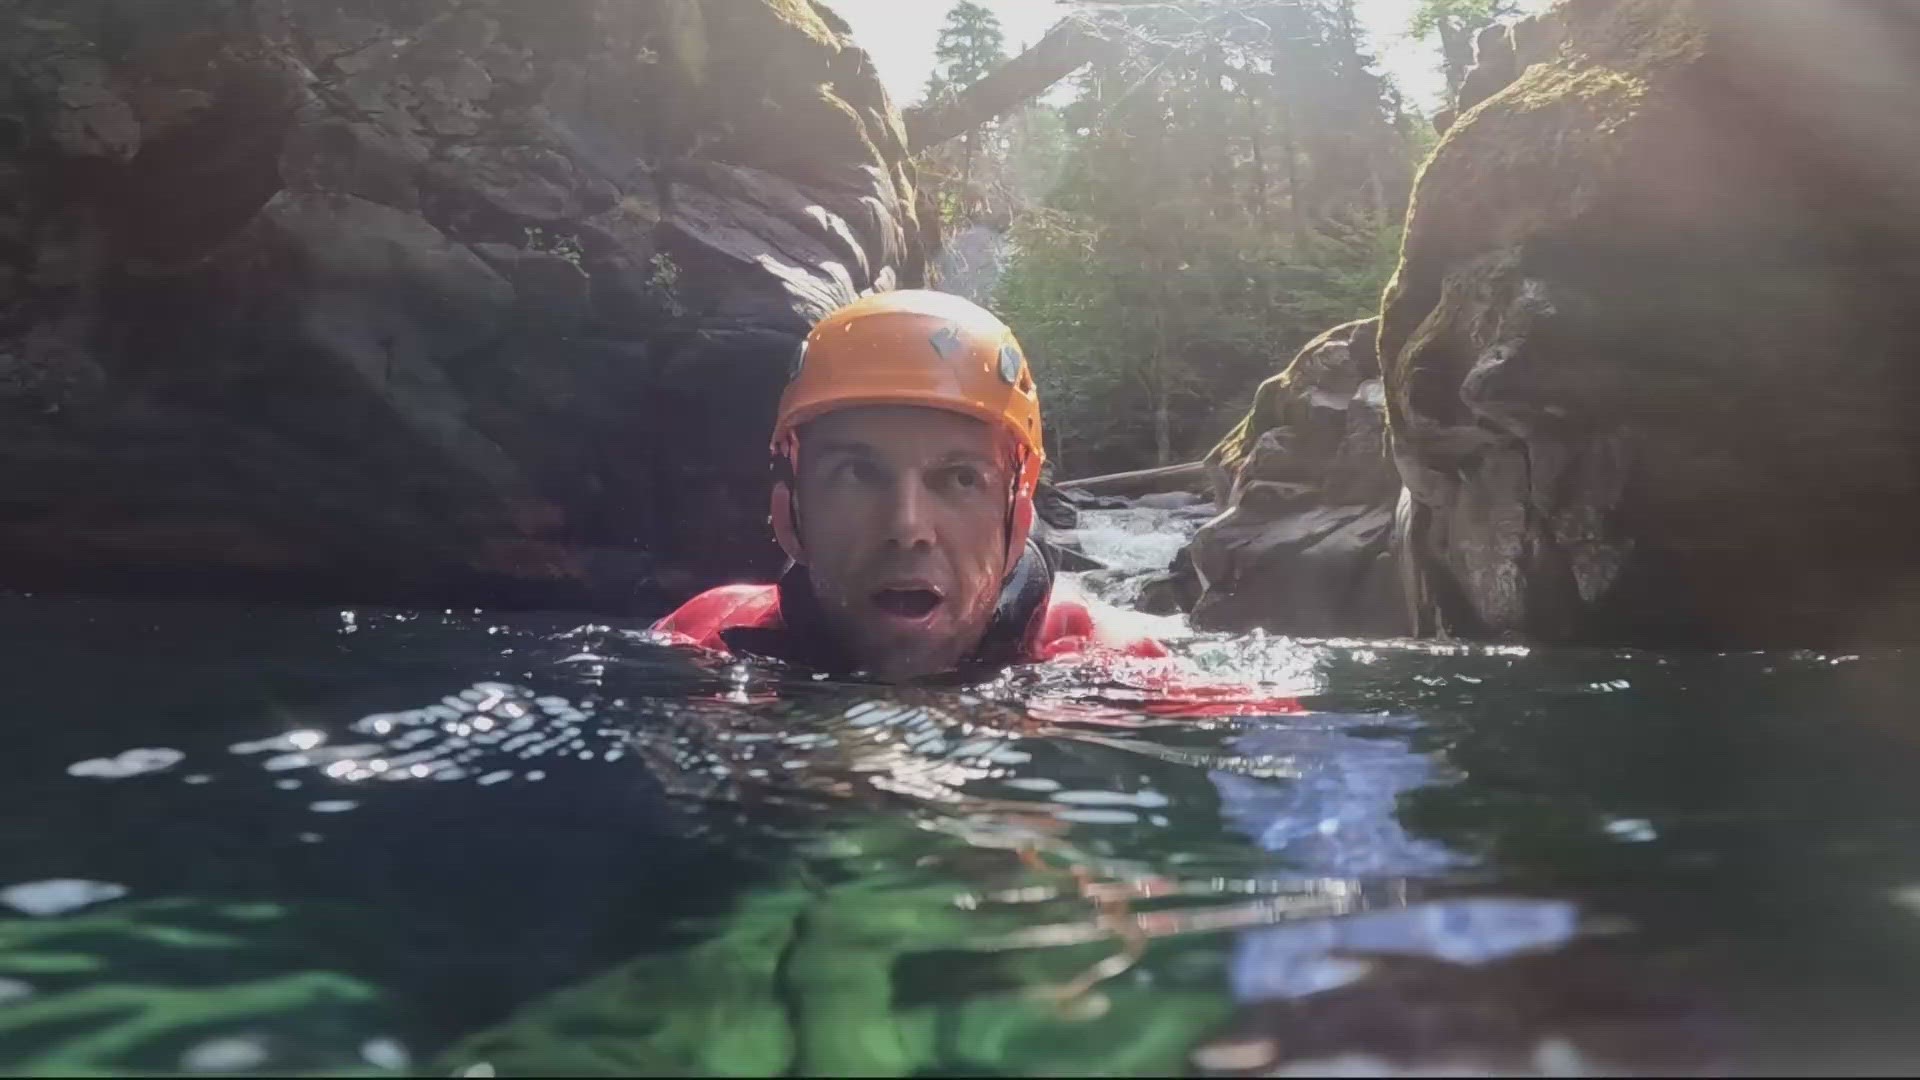 In this week's Let's Get Out There, Andrew Jimenez the owner of Cascade Canyon Guides shows off the Fiji pools in the Gifford Pinchot National Forest.